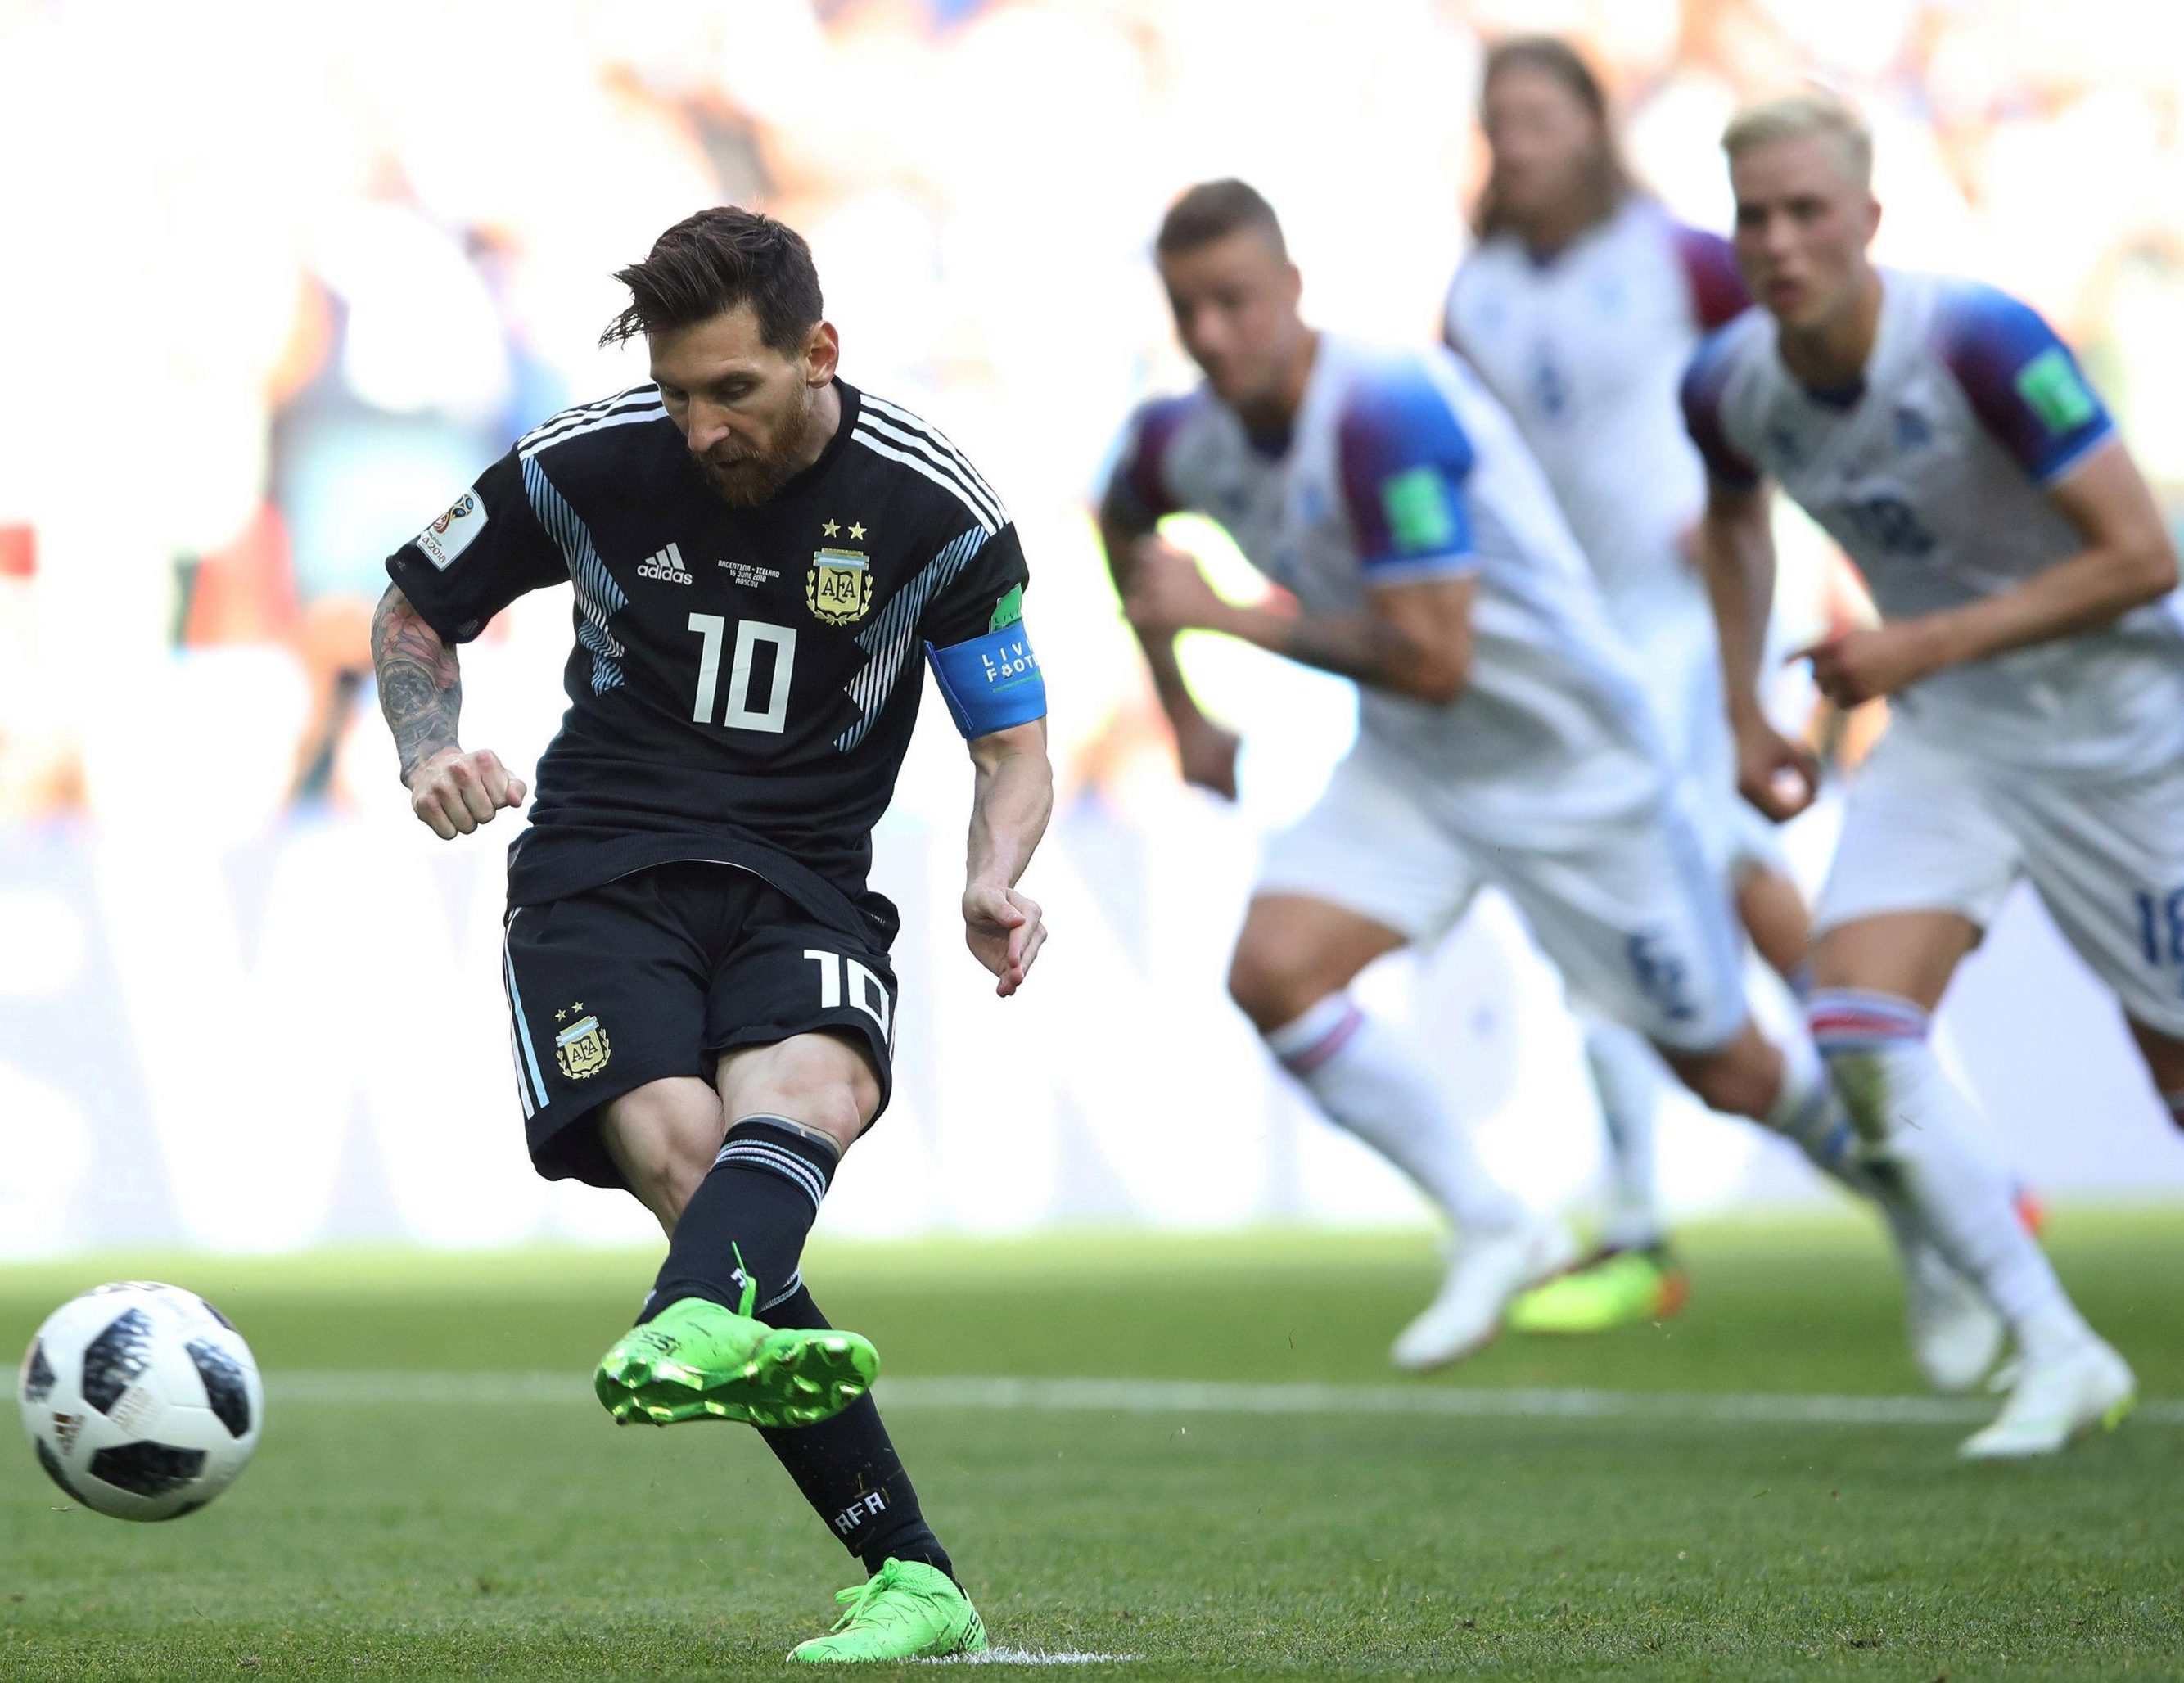 Lionel Messi's failed to find the net against Iceland, including missing a penalty